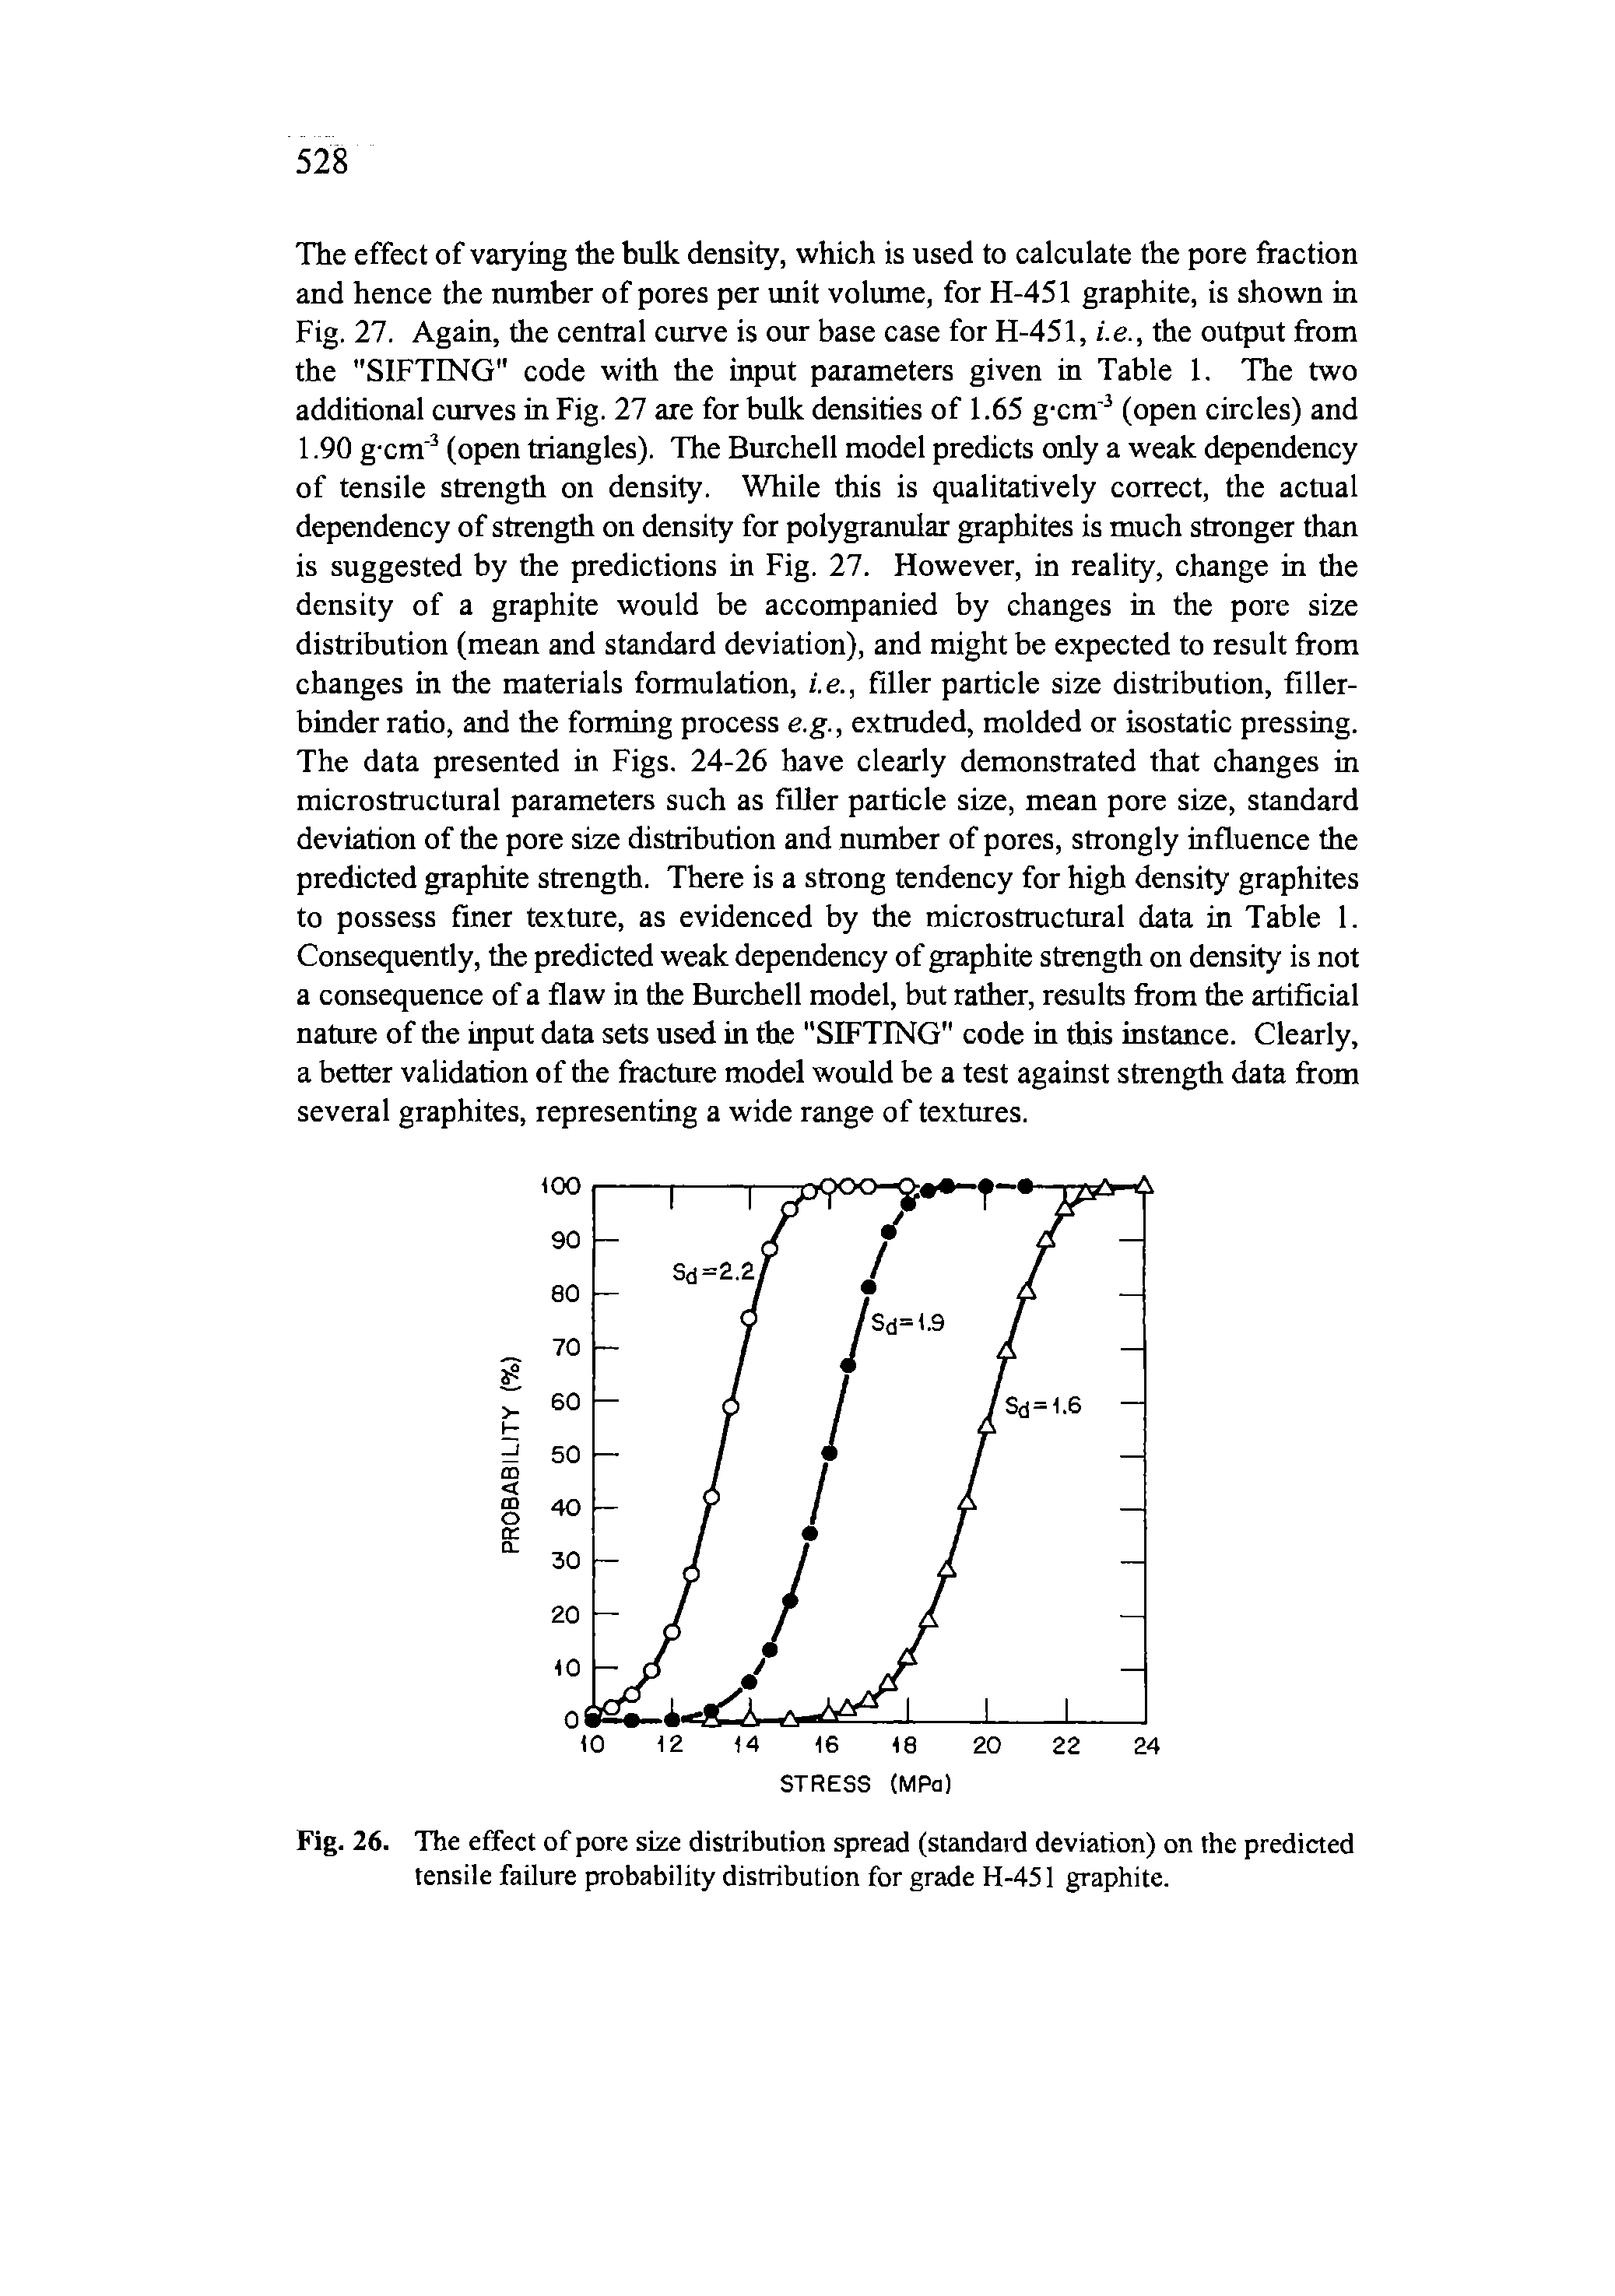 Fig. 26. The effect of pore size distribution spread (standard deviation) on the predicted tensile failure [jrobability distribution for grade H-451 graphite.